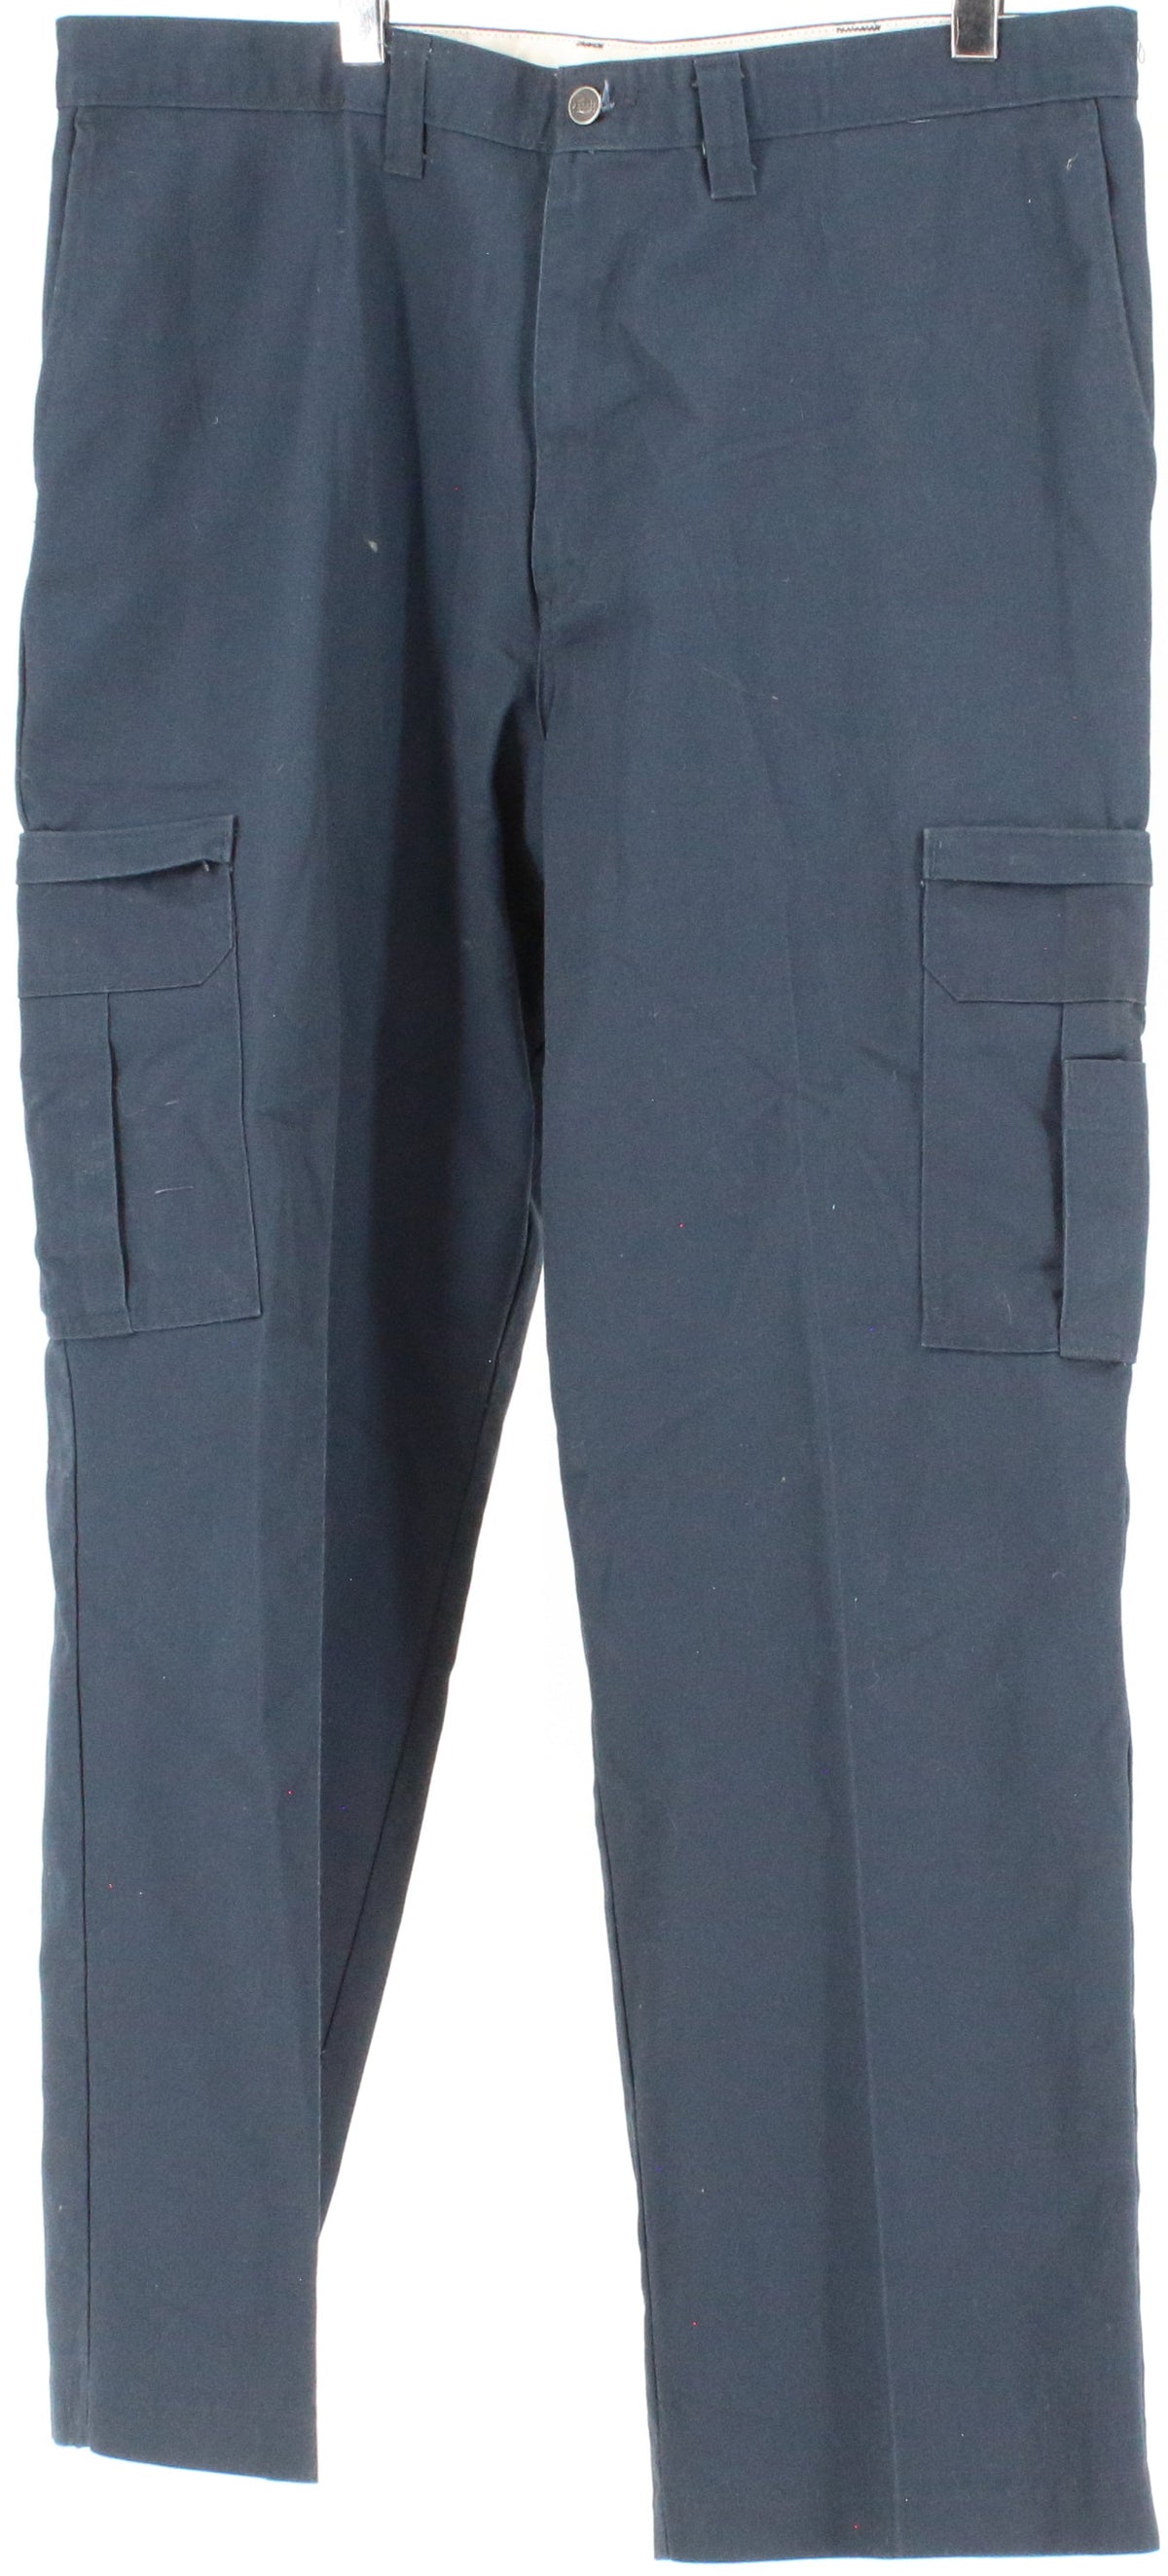 Dickies Navy Blue Cargo Pants With Zip Side Pockets